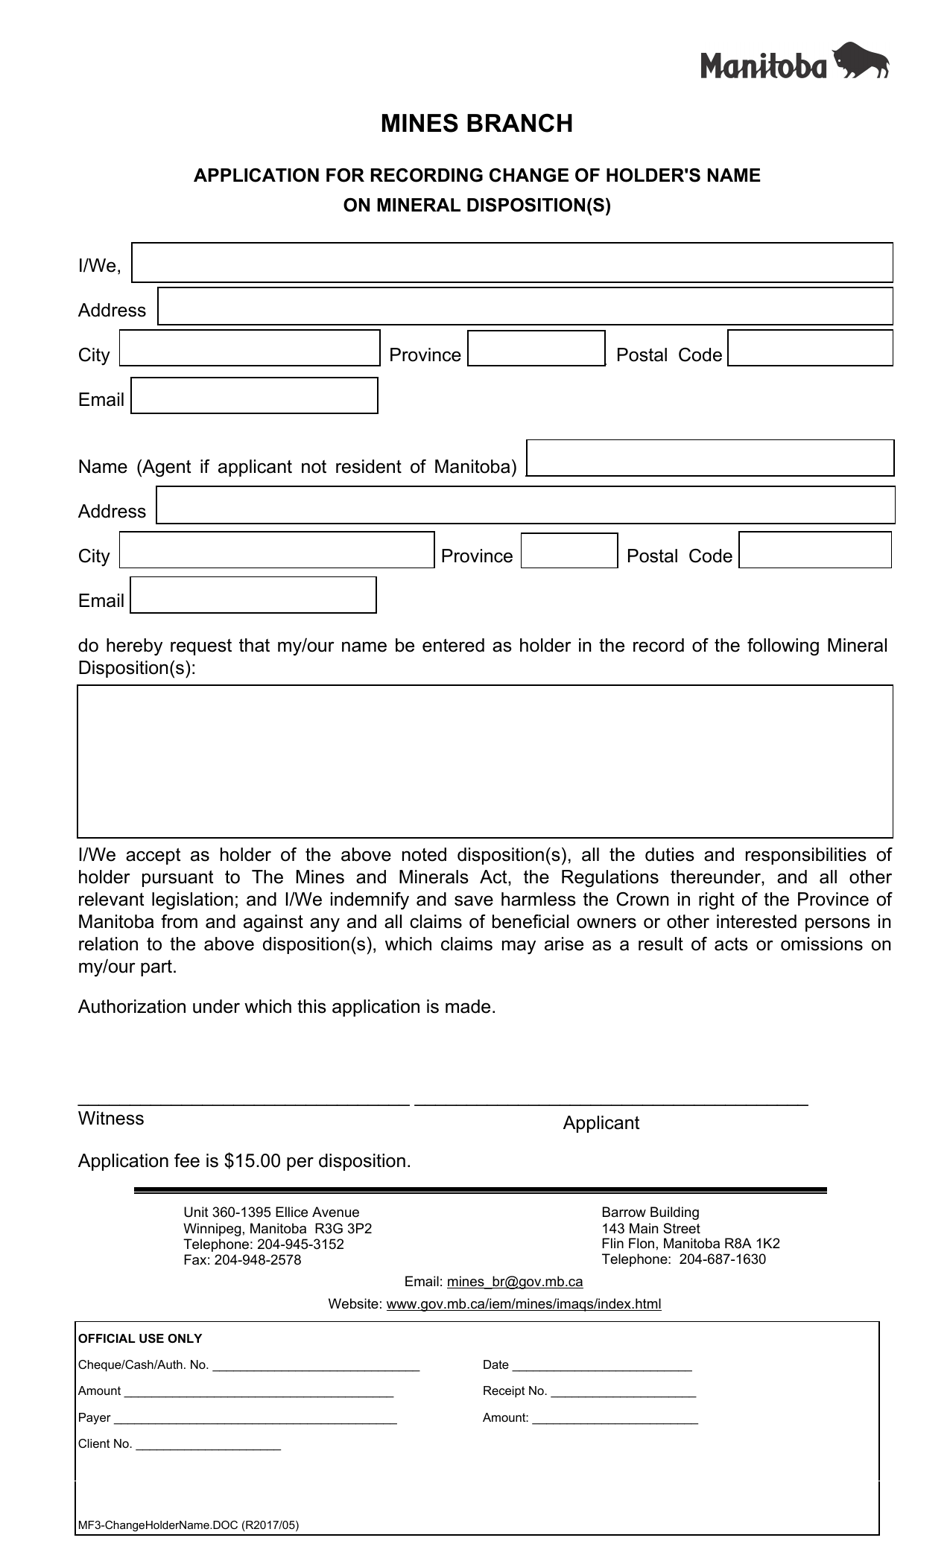 Form MF3 Application for Recording Change of Holders Name on Mineral Disposition(S) - Manitoba, Canada, Page 1